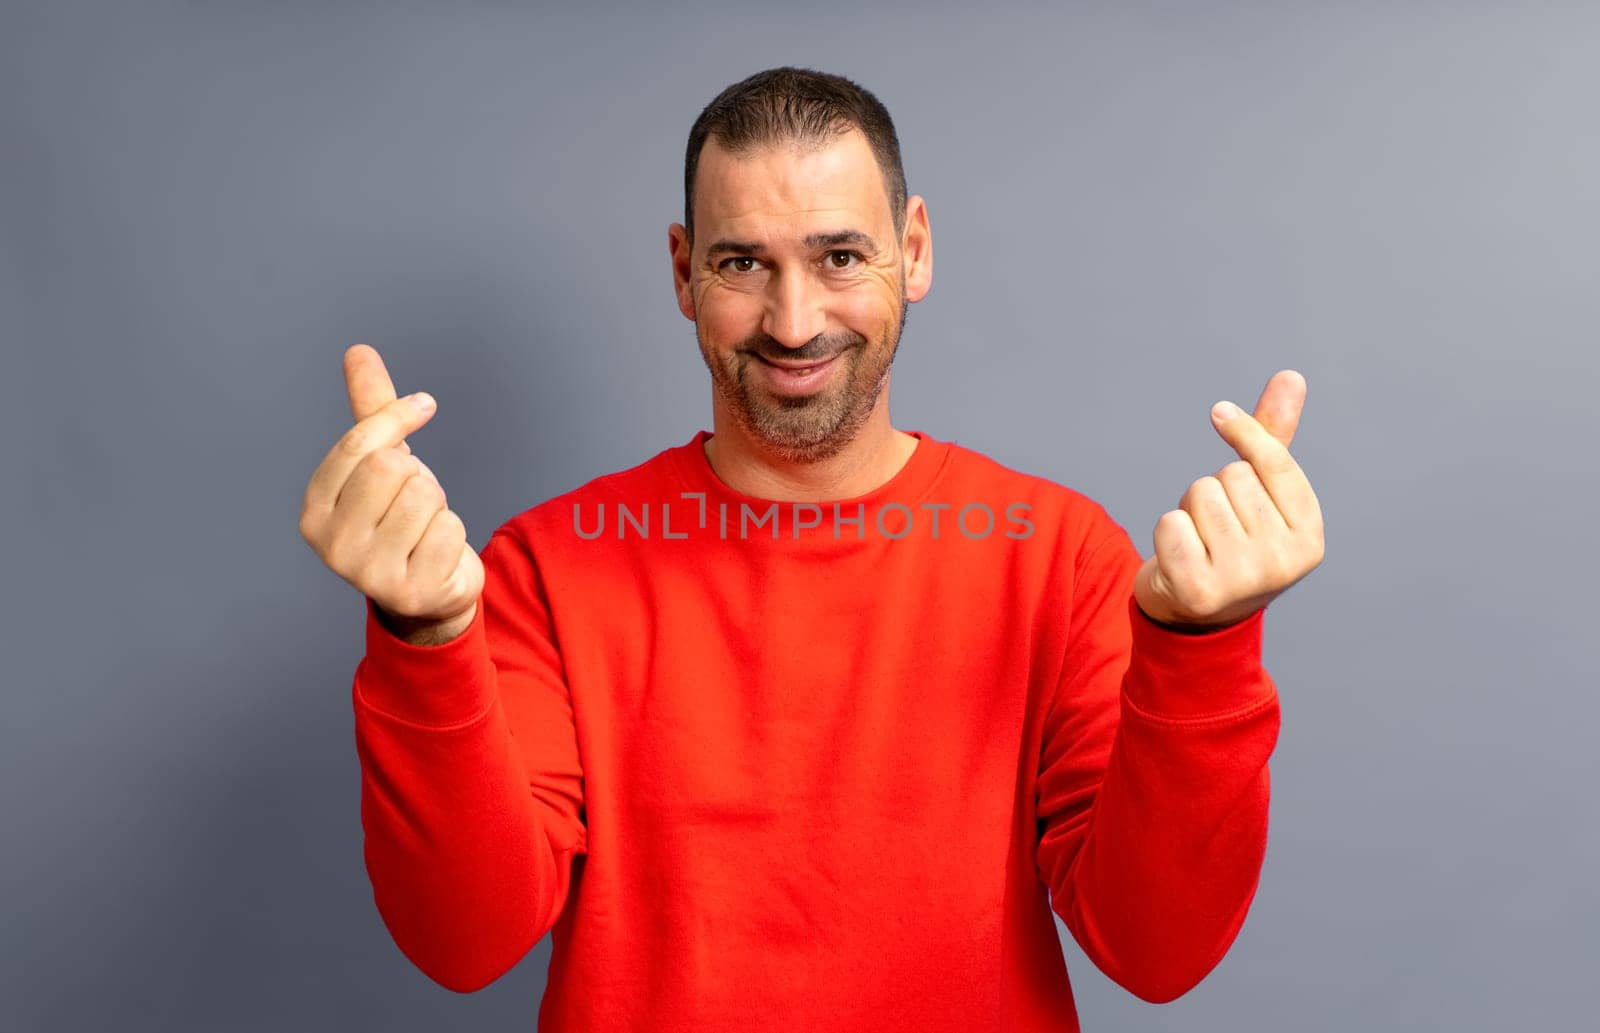 Bearded hispanic man in his 40s wearing a red sweater making the money gesture rubbing his fingers with a greedy face, isolated over gray background